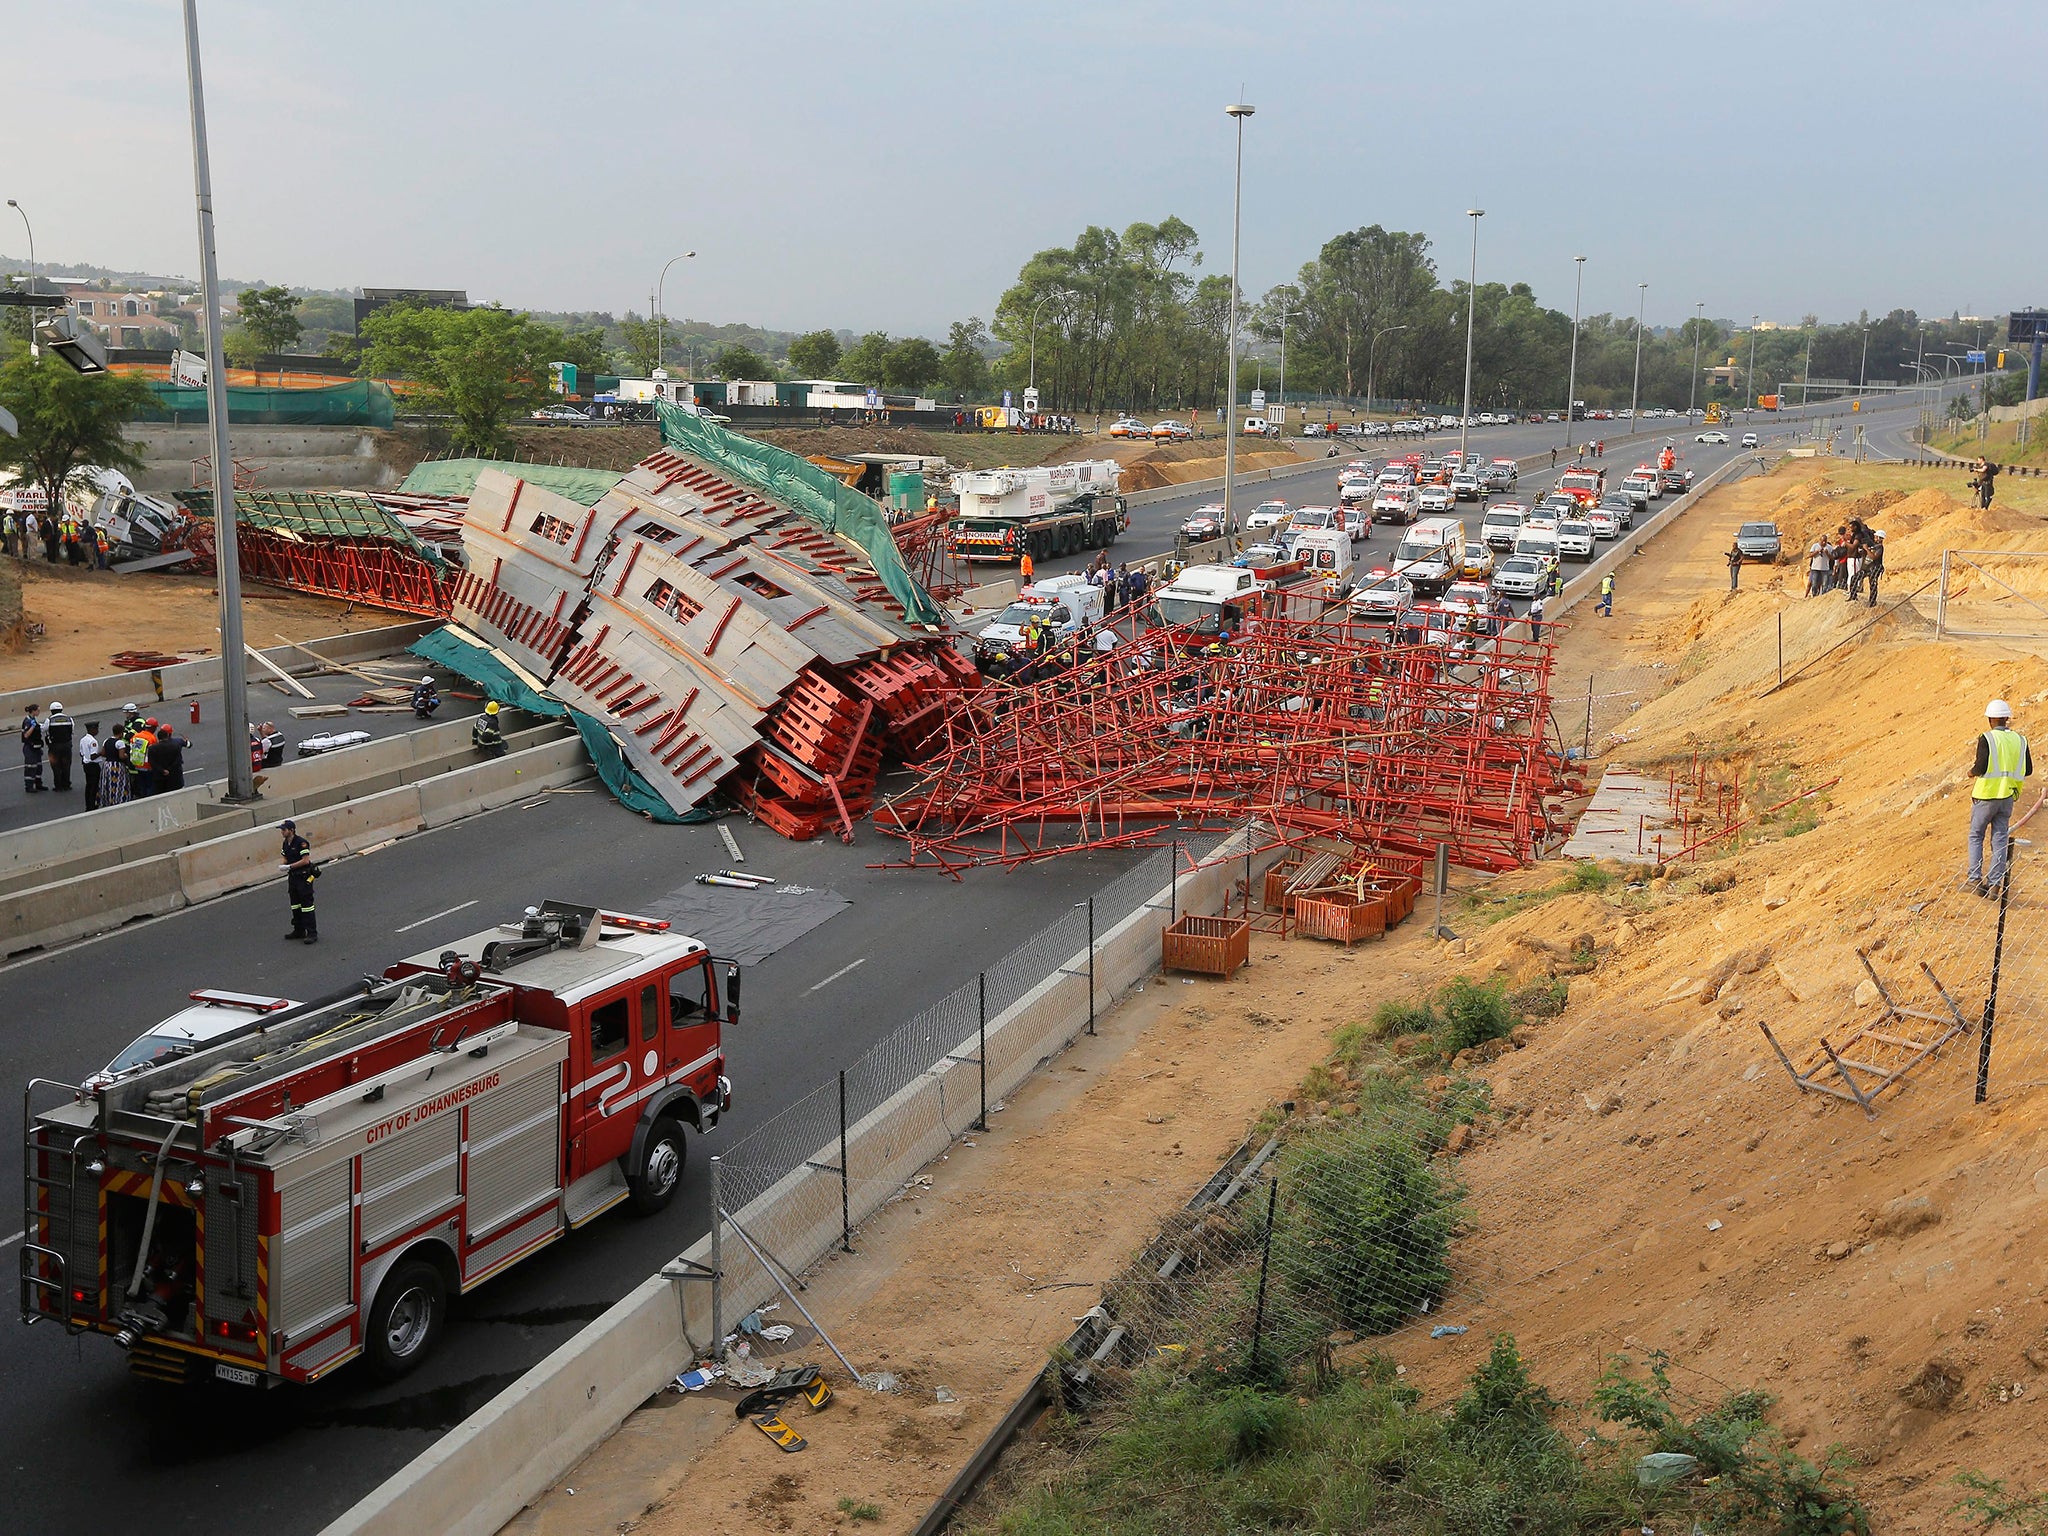 South Africa Bridge Collapse Kills Two On M1 Highway The Independent